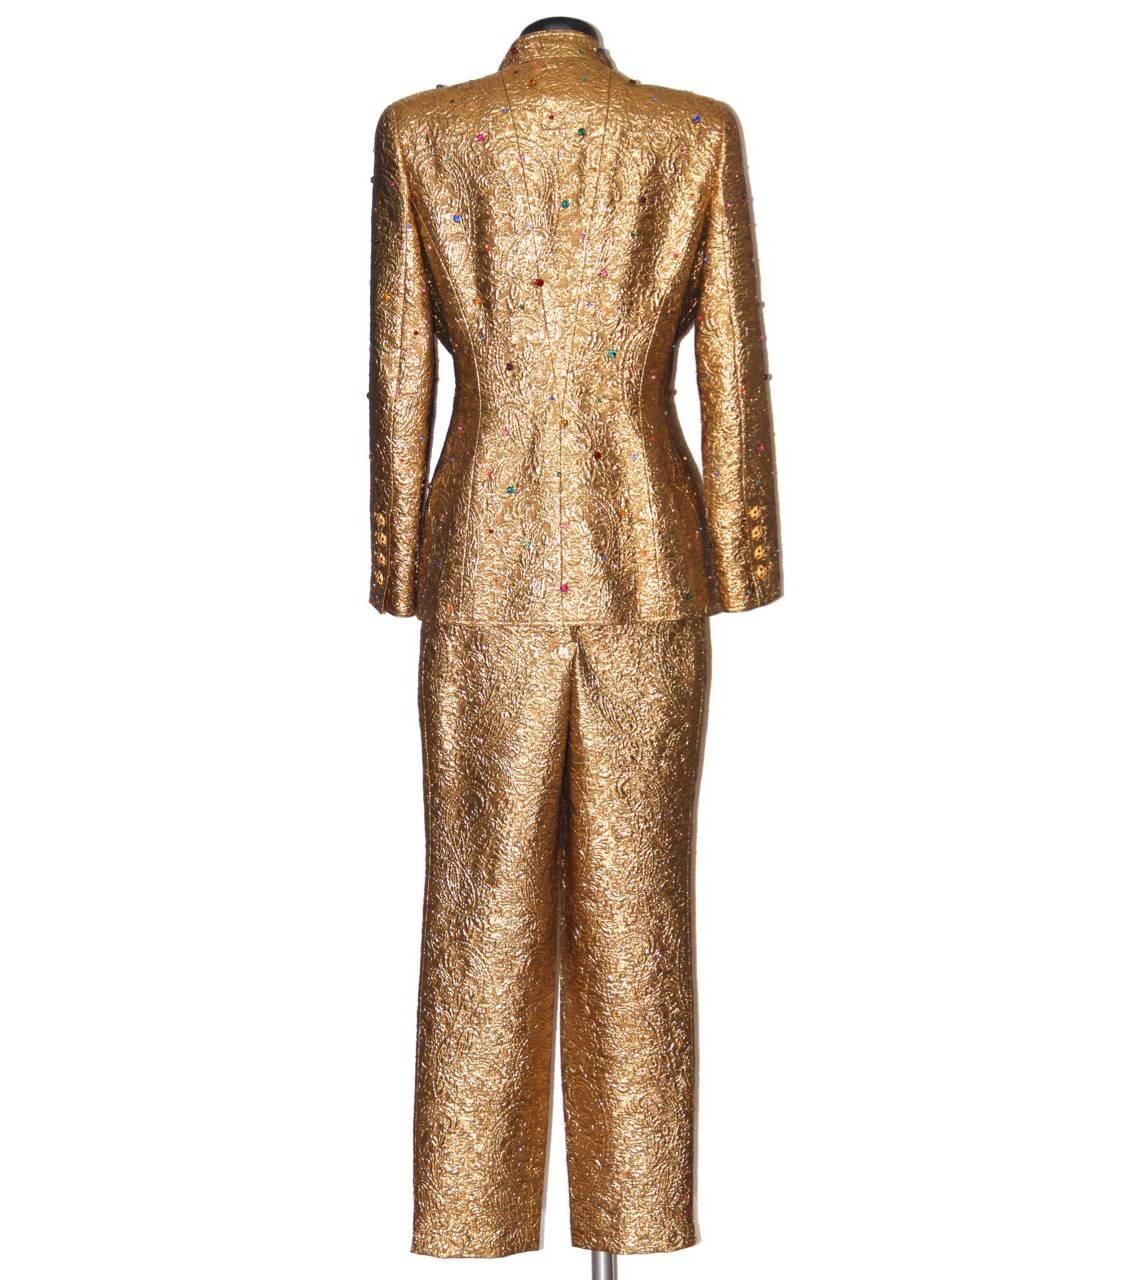 Exceptional collector's pantsuit from the Chanel Fall 1996 collection featuring an amazing tailored fit and jewels Gripoix buttons.
The jacket features some embroidered colored crystals, a mandarin collar, eleven gold Gripoix front buttons, four